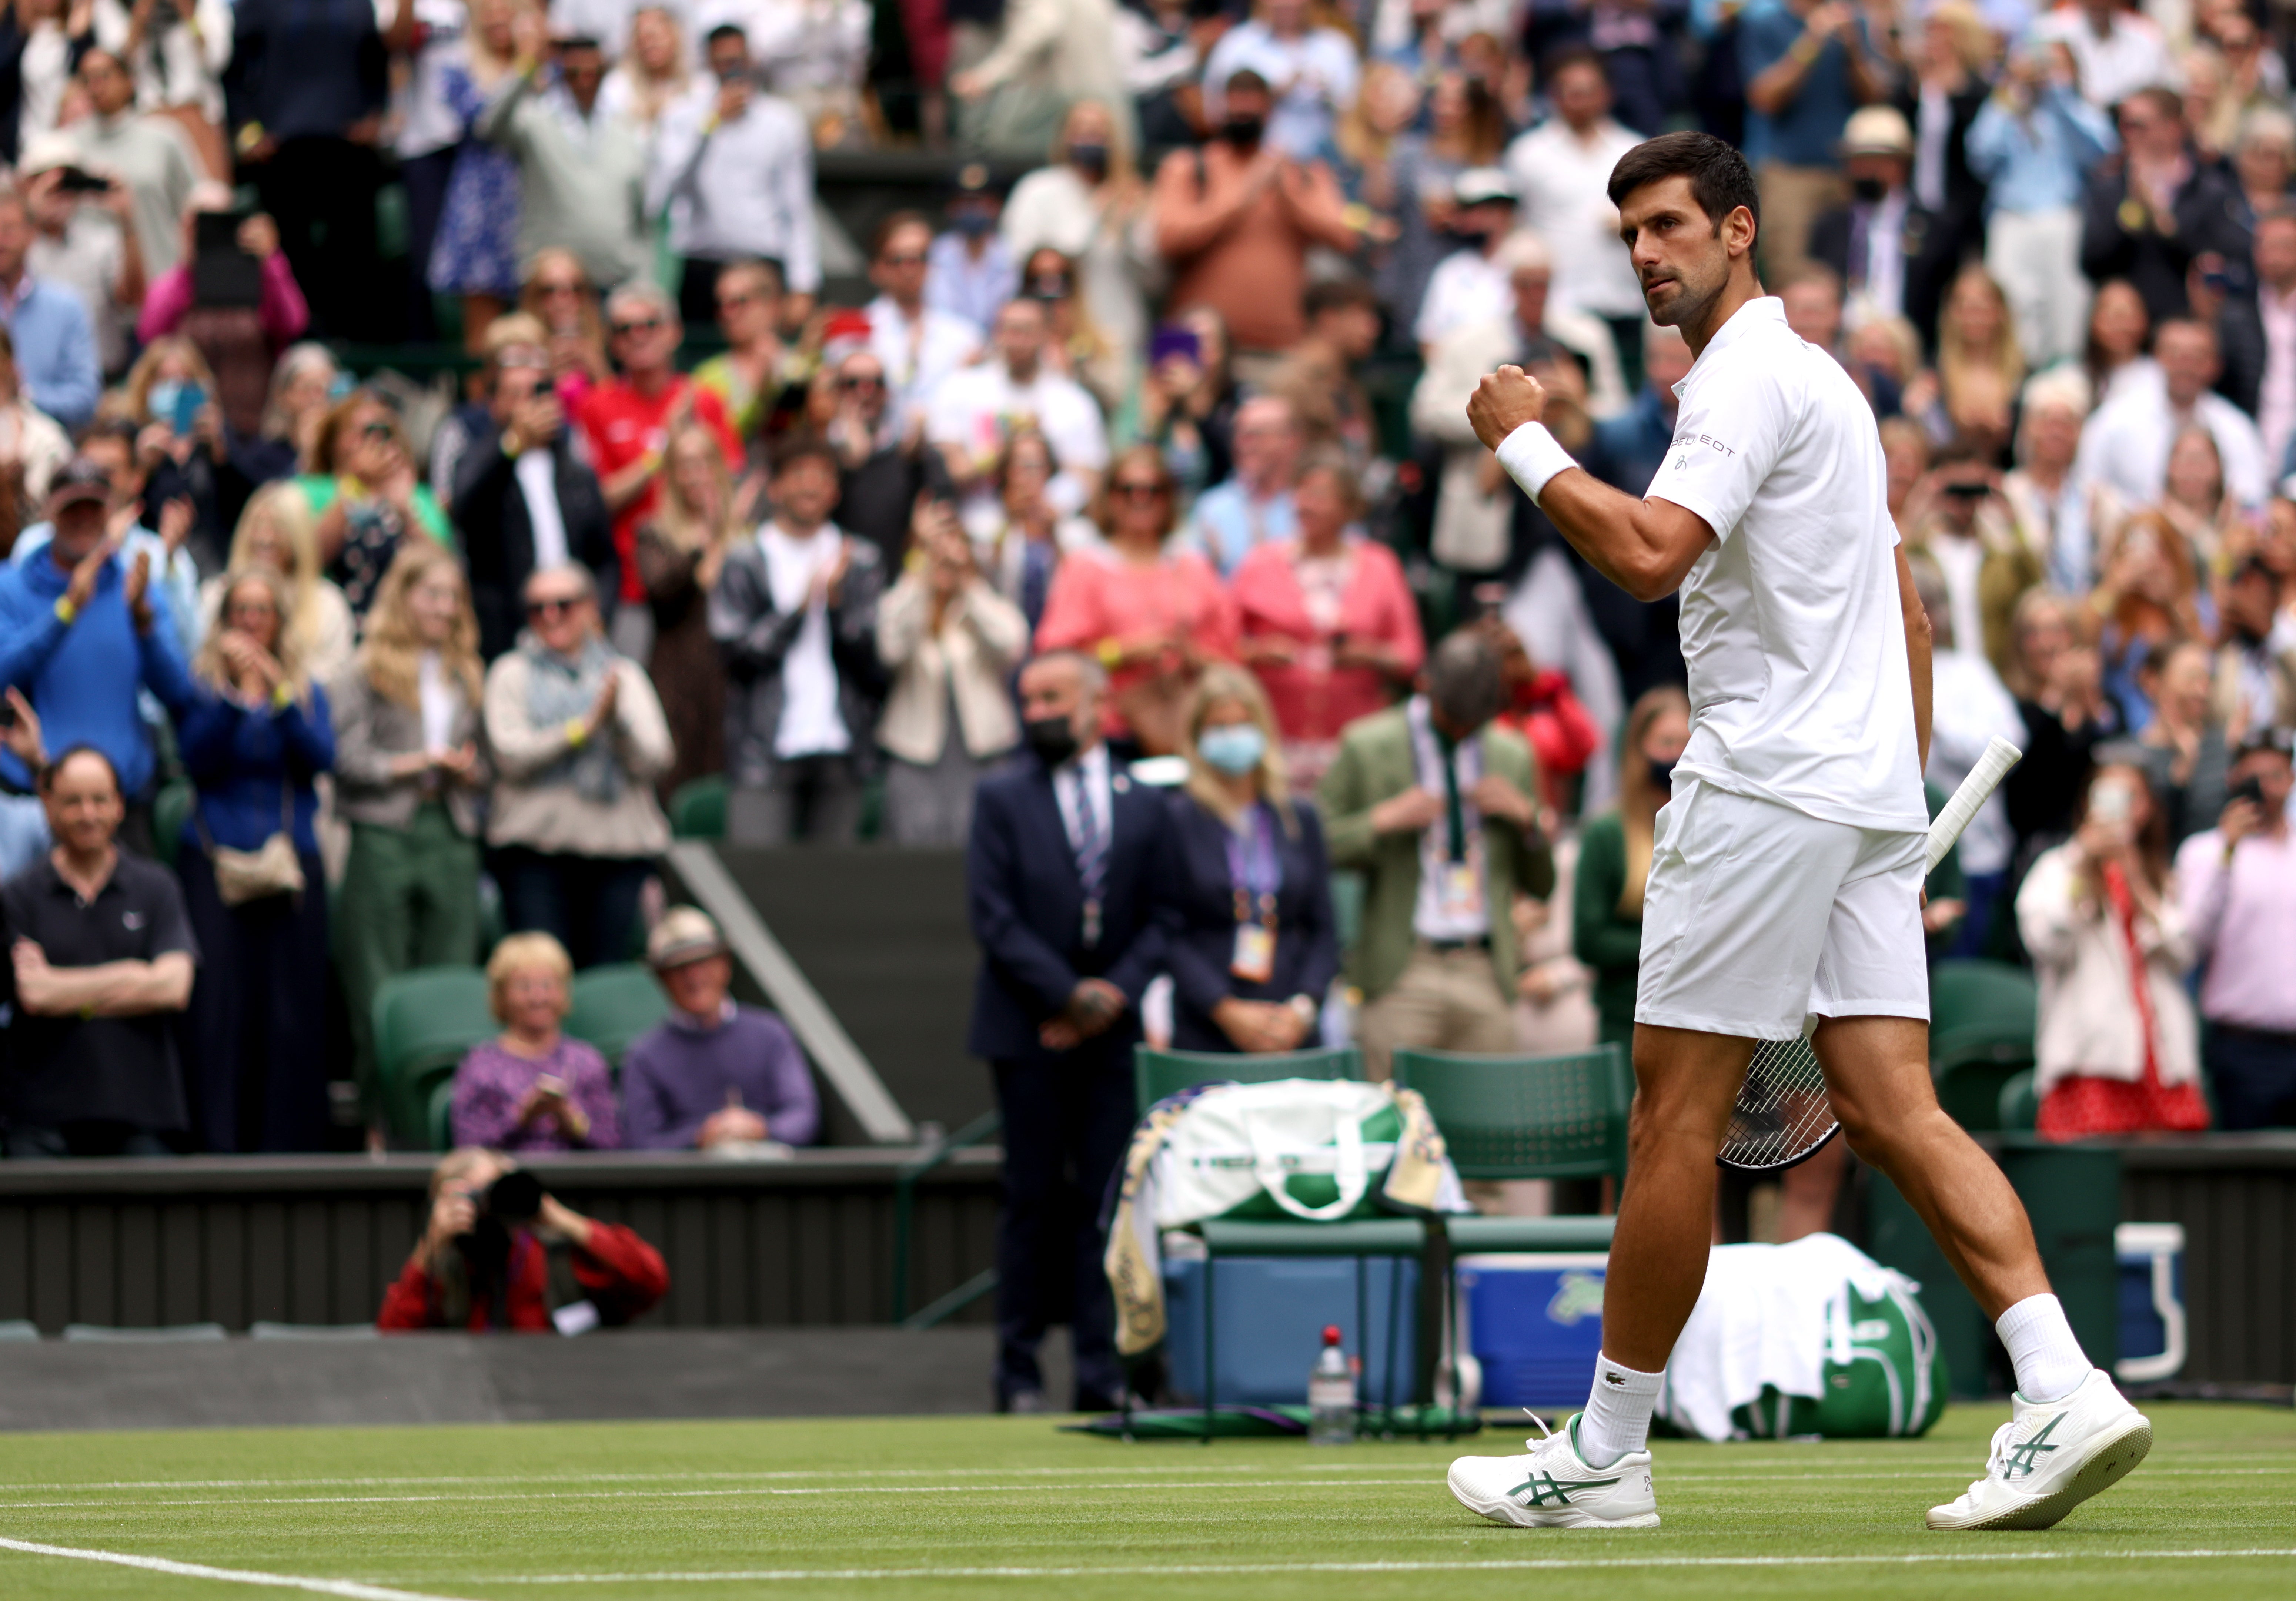 Novak Djokovic made it through to round three with a straight-sets win against Kevin Anderson at Wimbledon